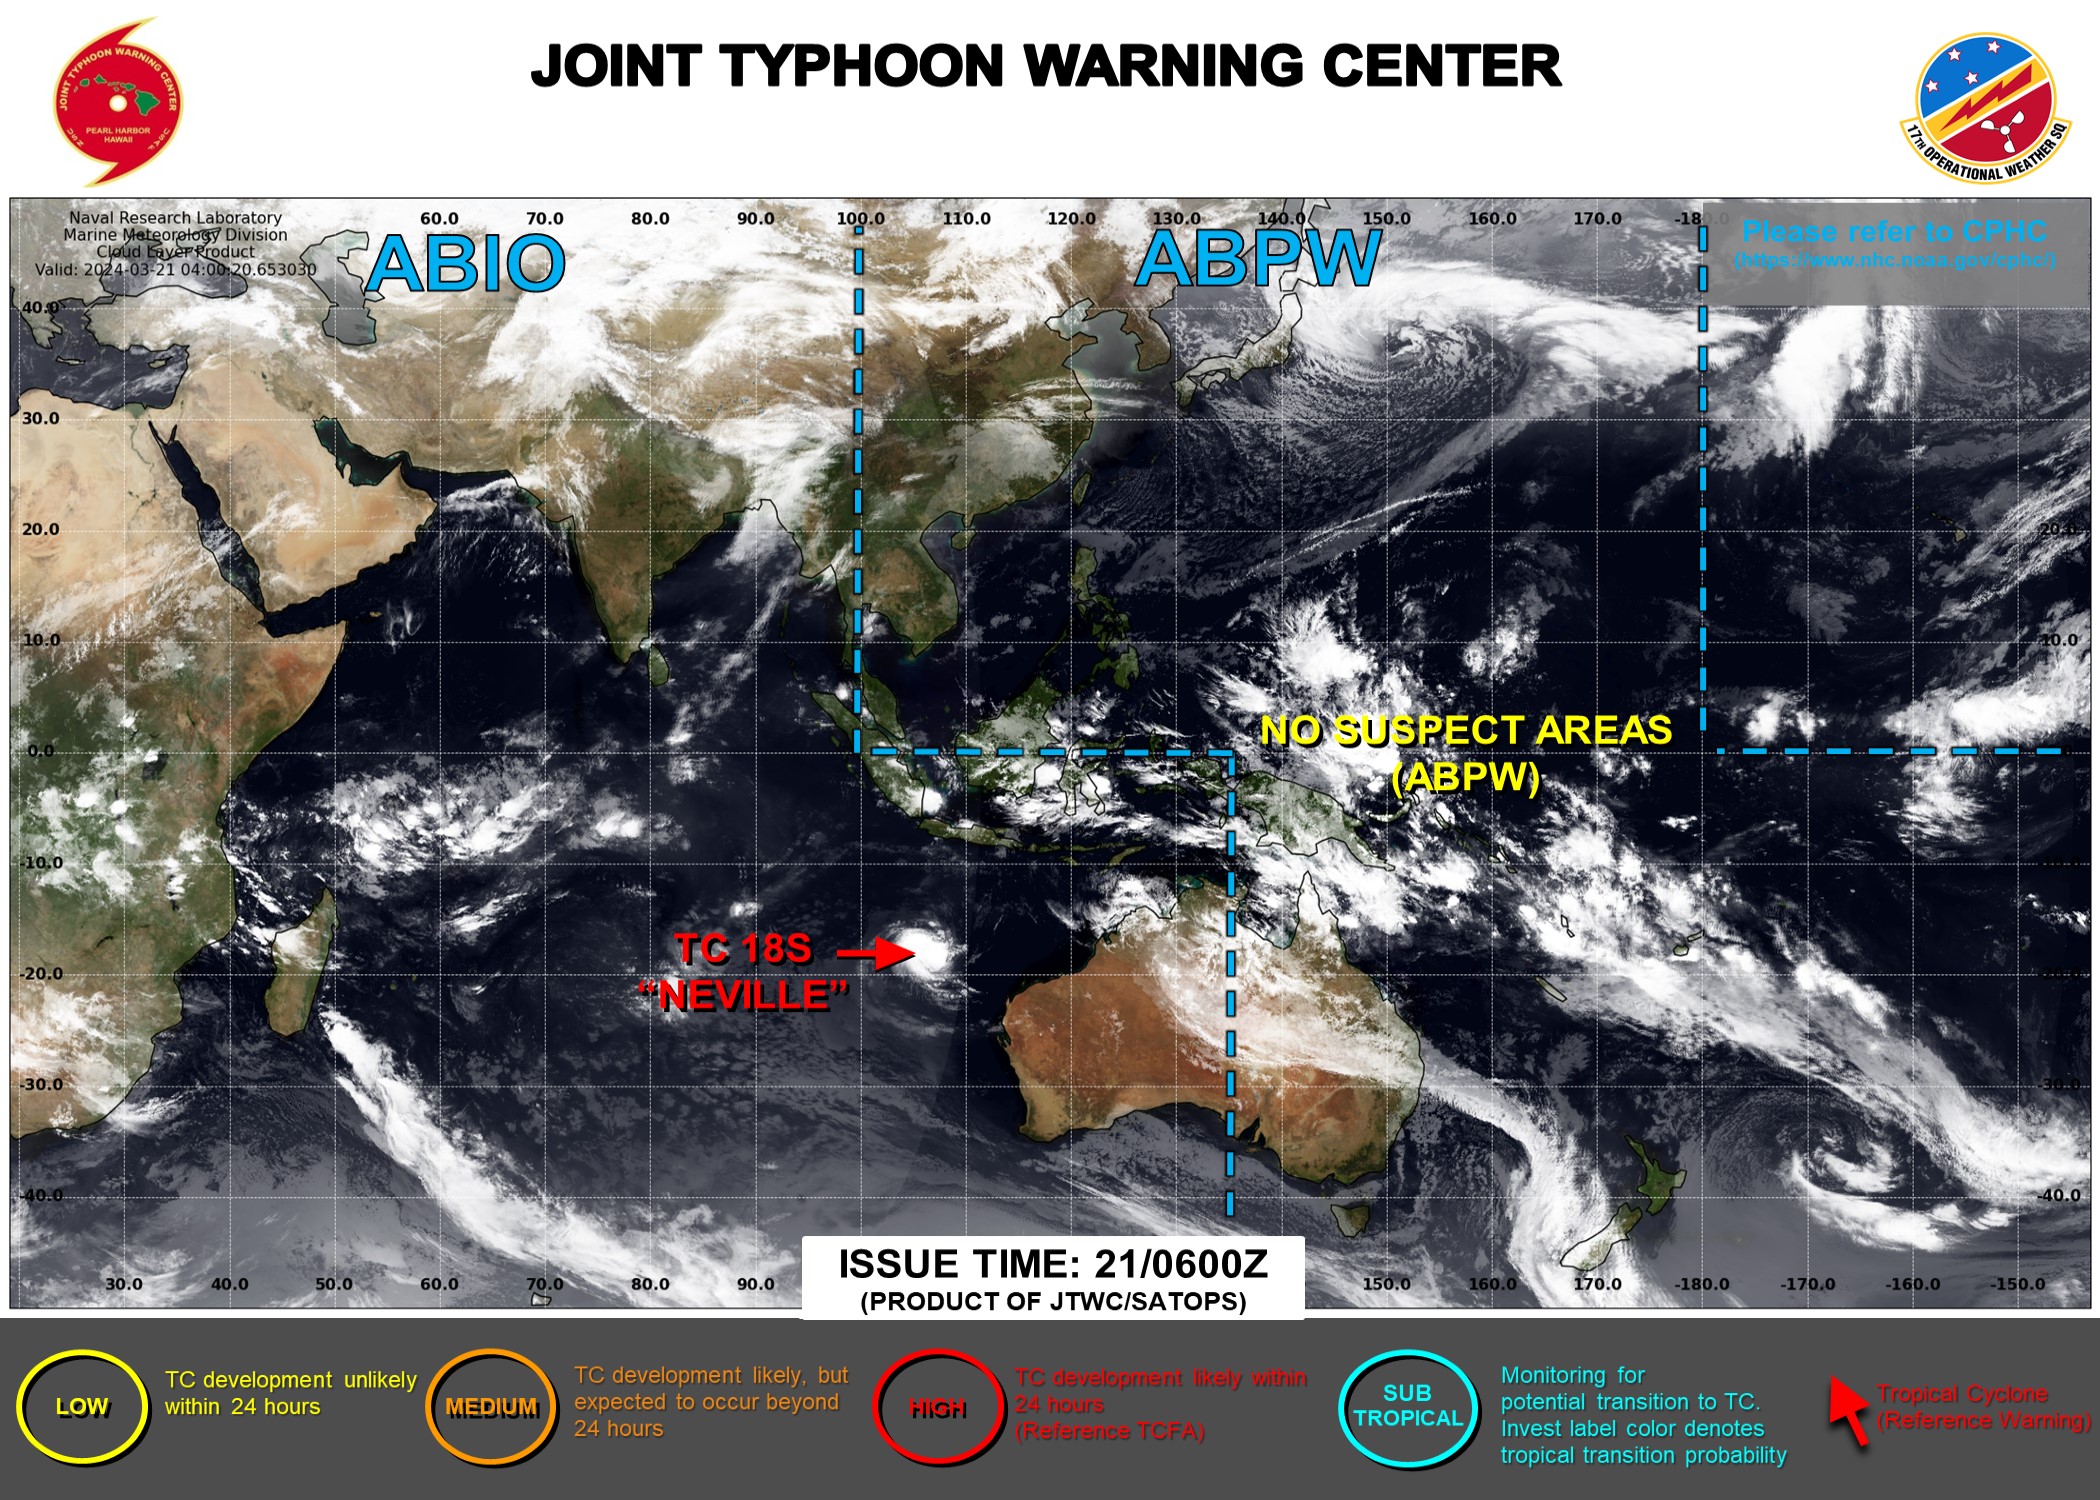 JTWC IS ISSUING 6HOURLY WARNINGS AND 3HOURLY SATELLITE BULLETINS ON TC 18S